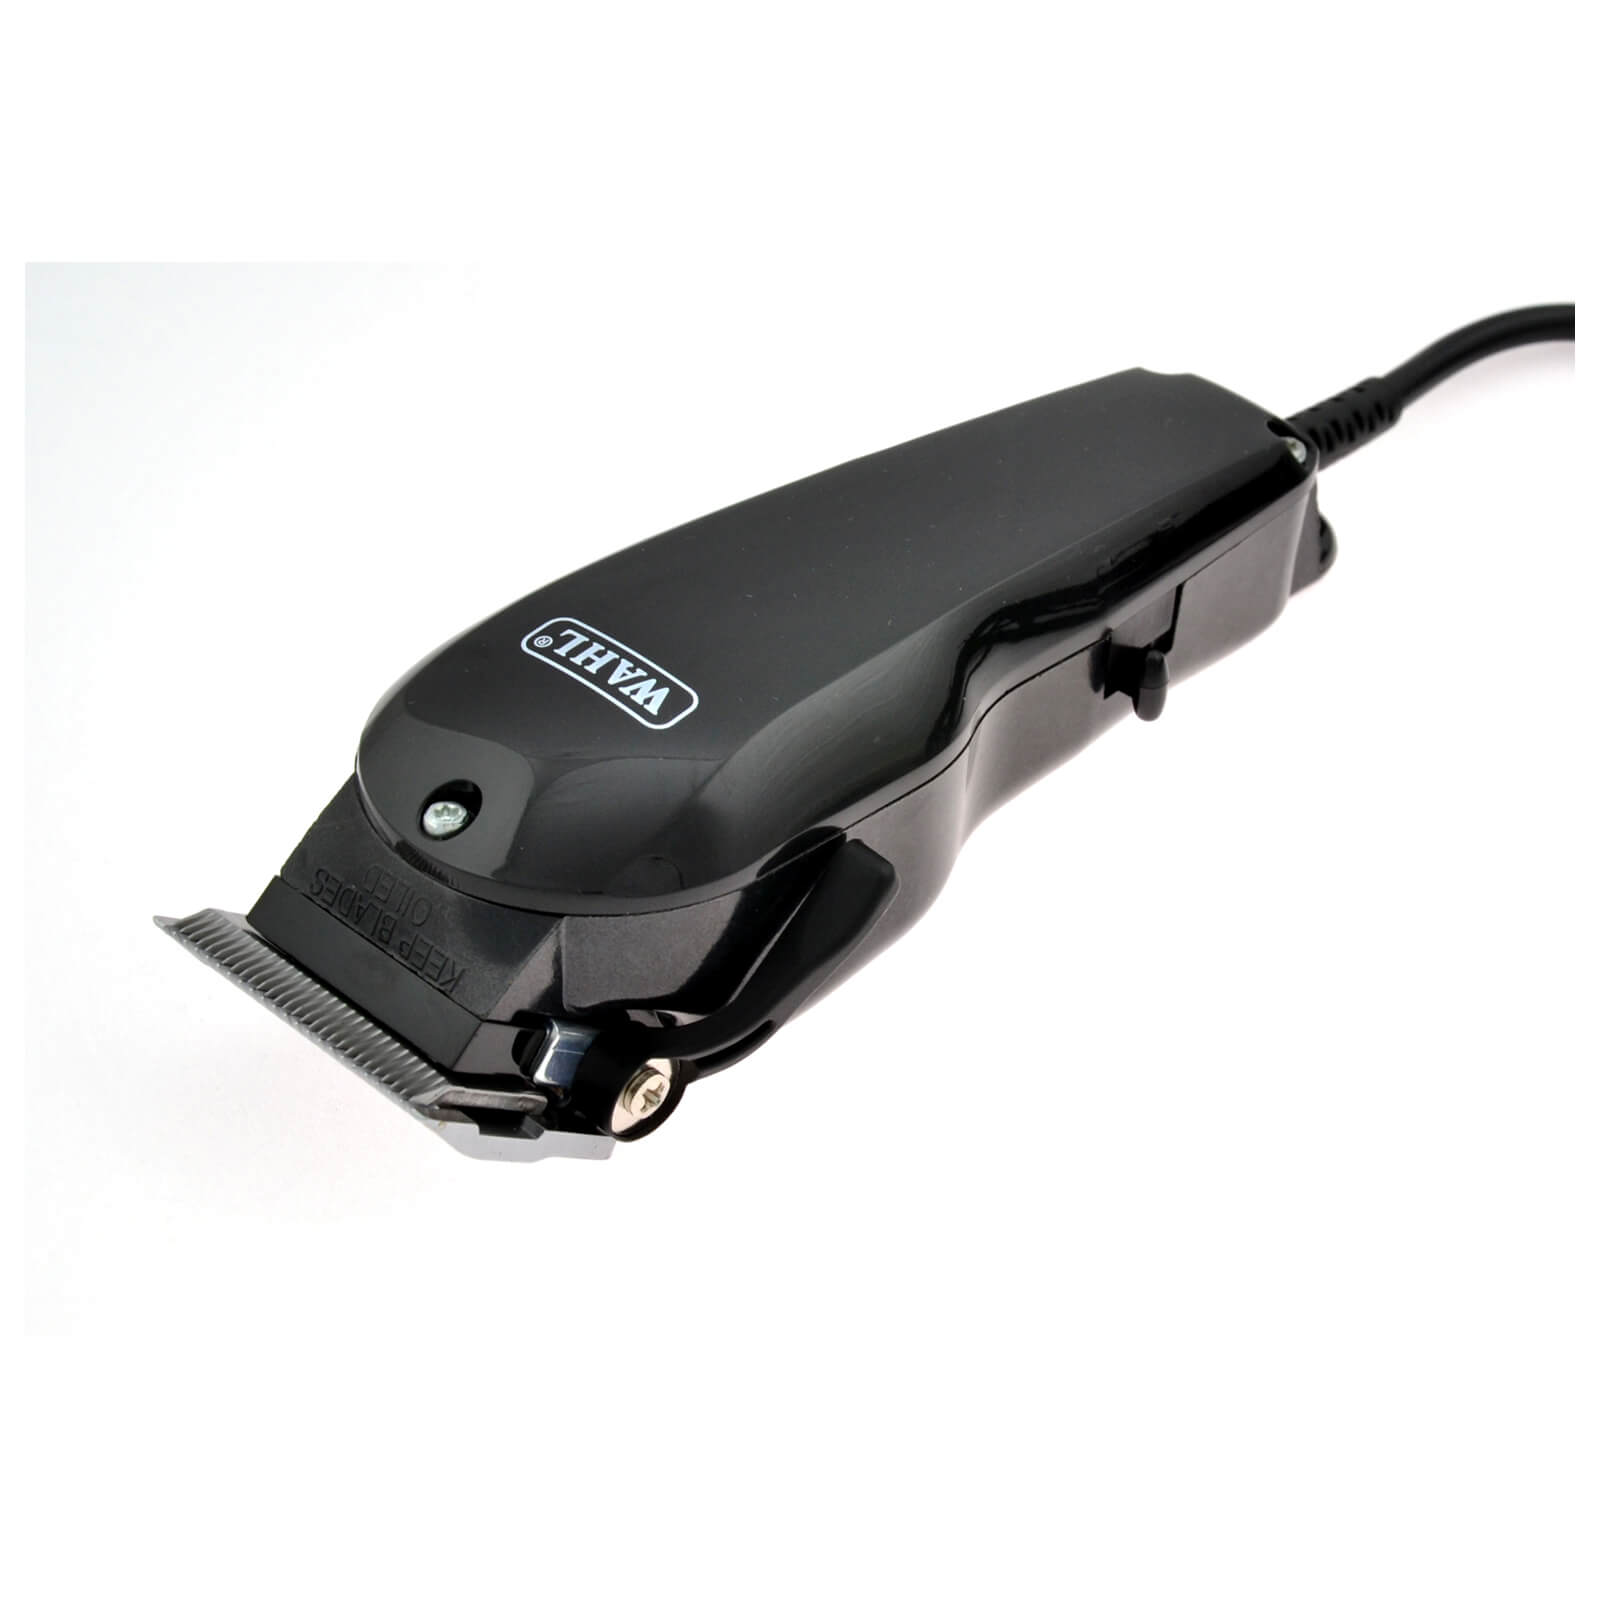 wahl clippers black